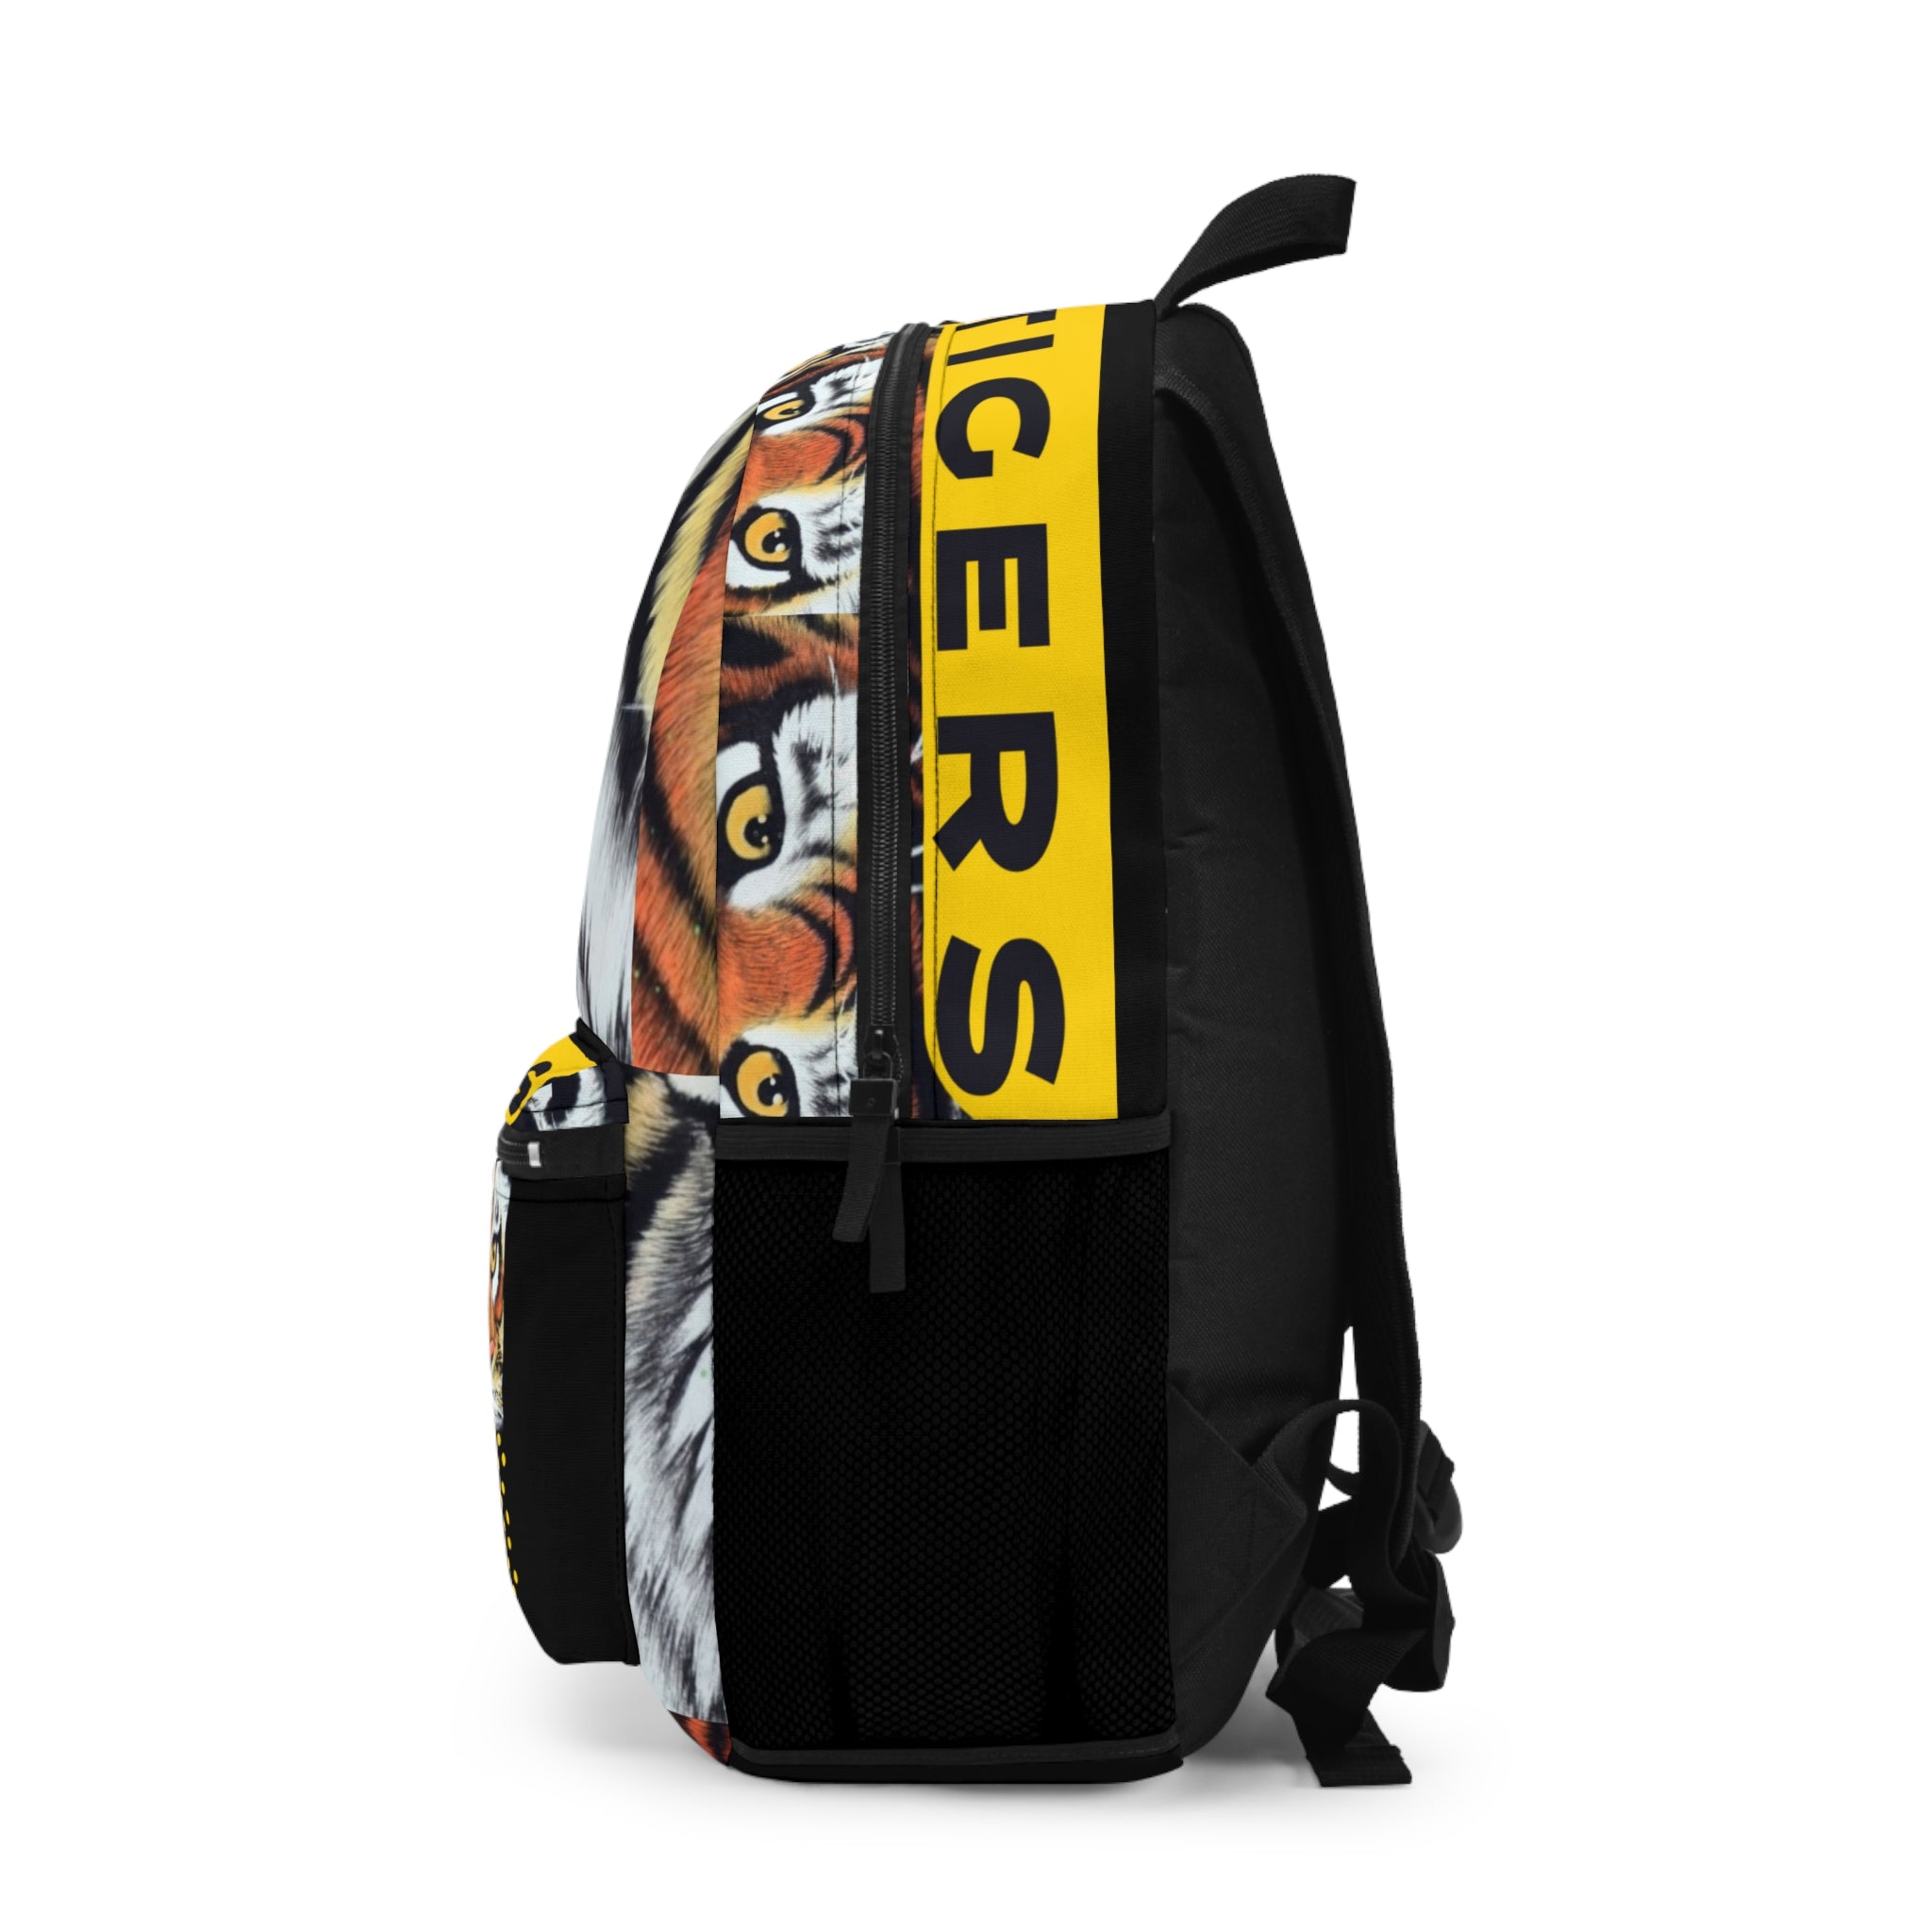 Tigers Mascot Sport Team Backpack - Shell Design Boutique